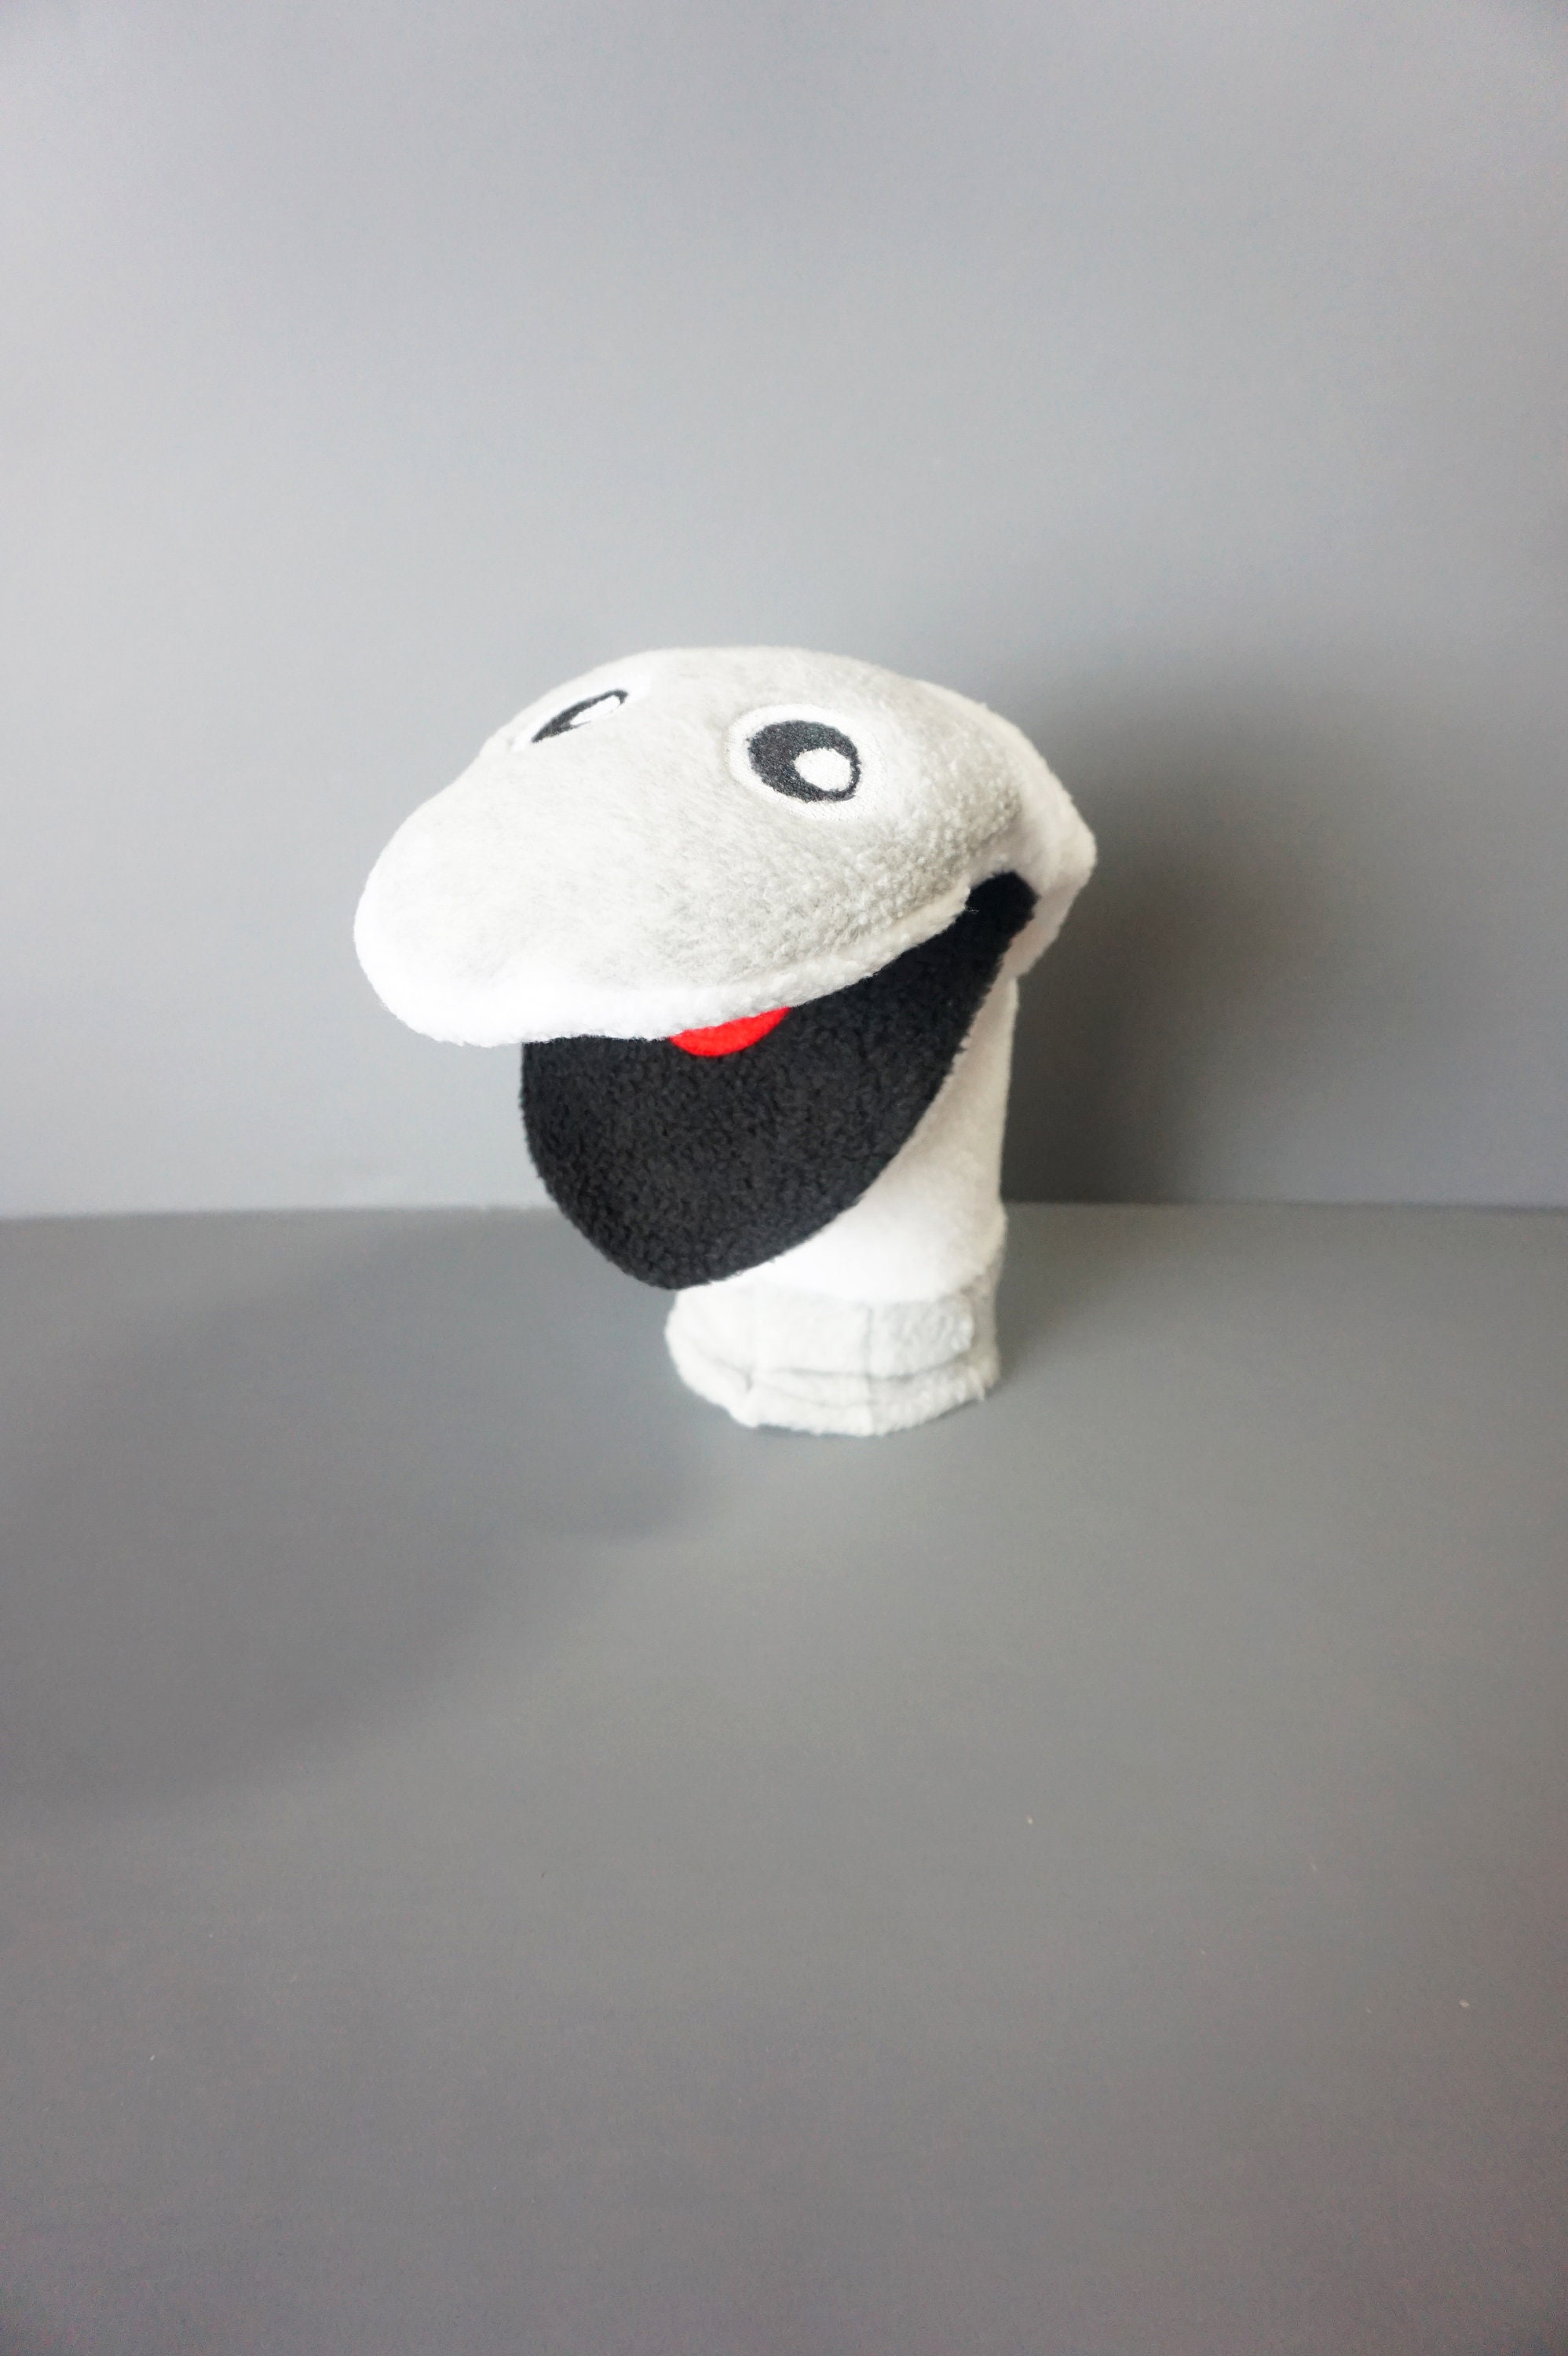 Arts and Crafters Baldi's Basics Sock Puppet Unofficial Arts and crafts